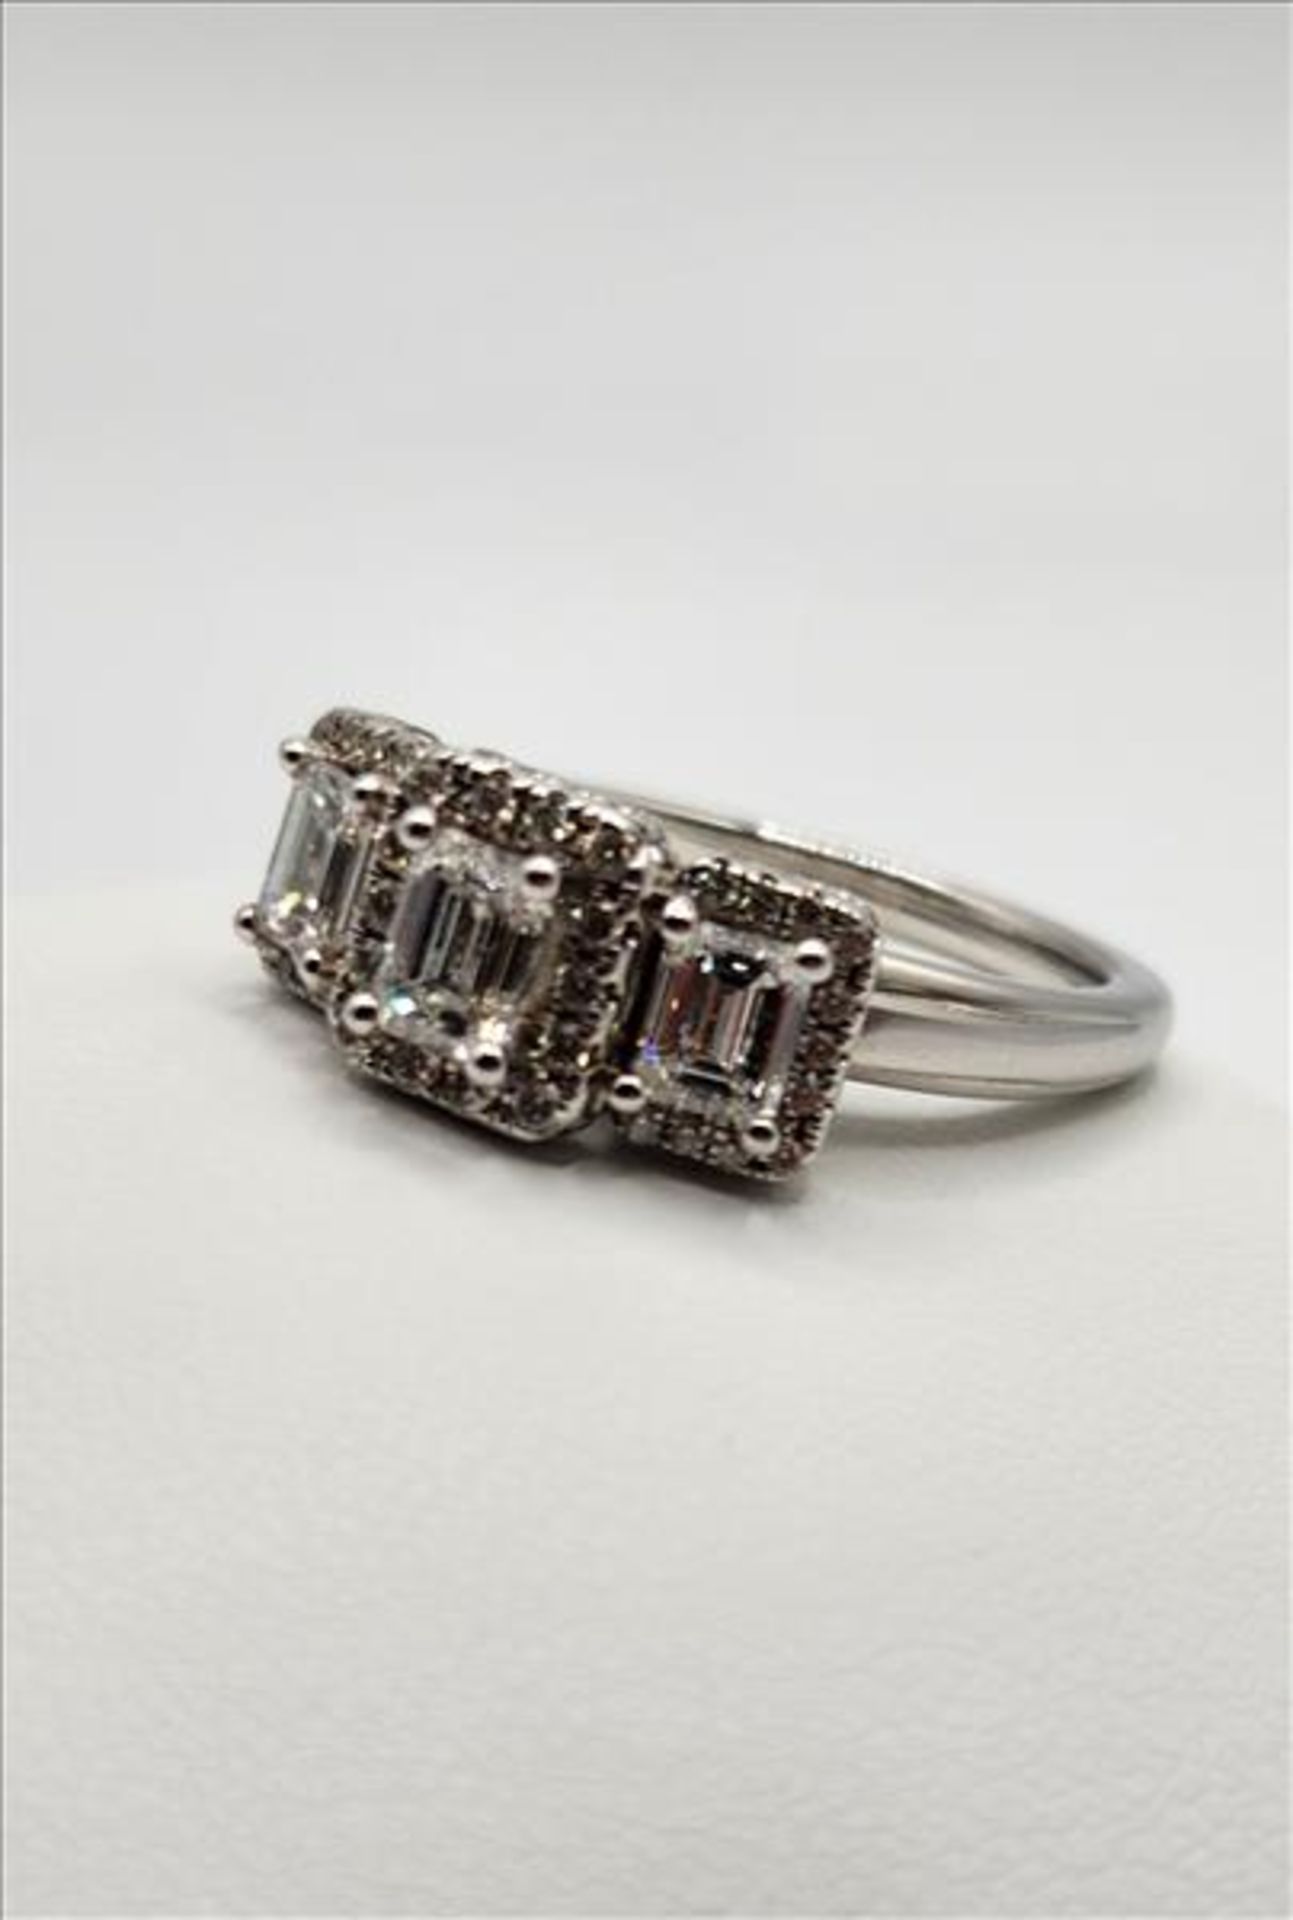 One lady’s stamped and tested 14kt VERA WANG LOVE collection diamond ring. Contained across the - Image 7 of 11